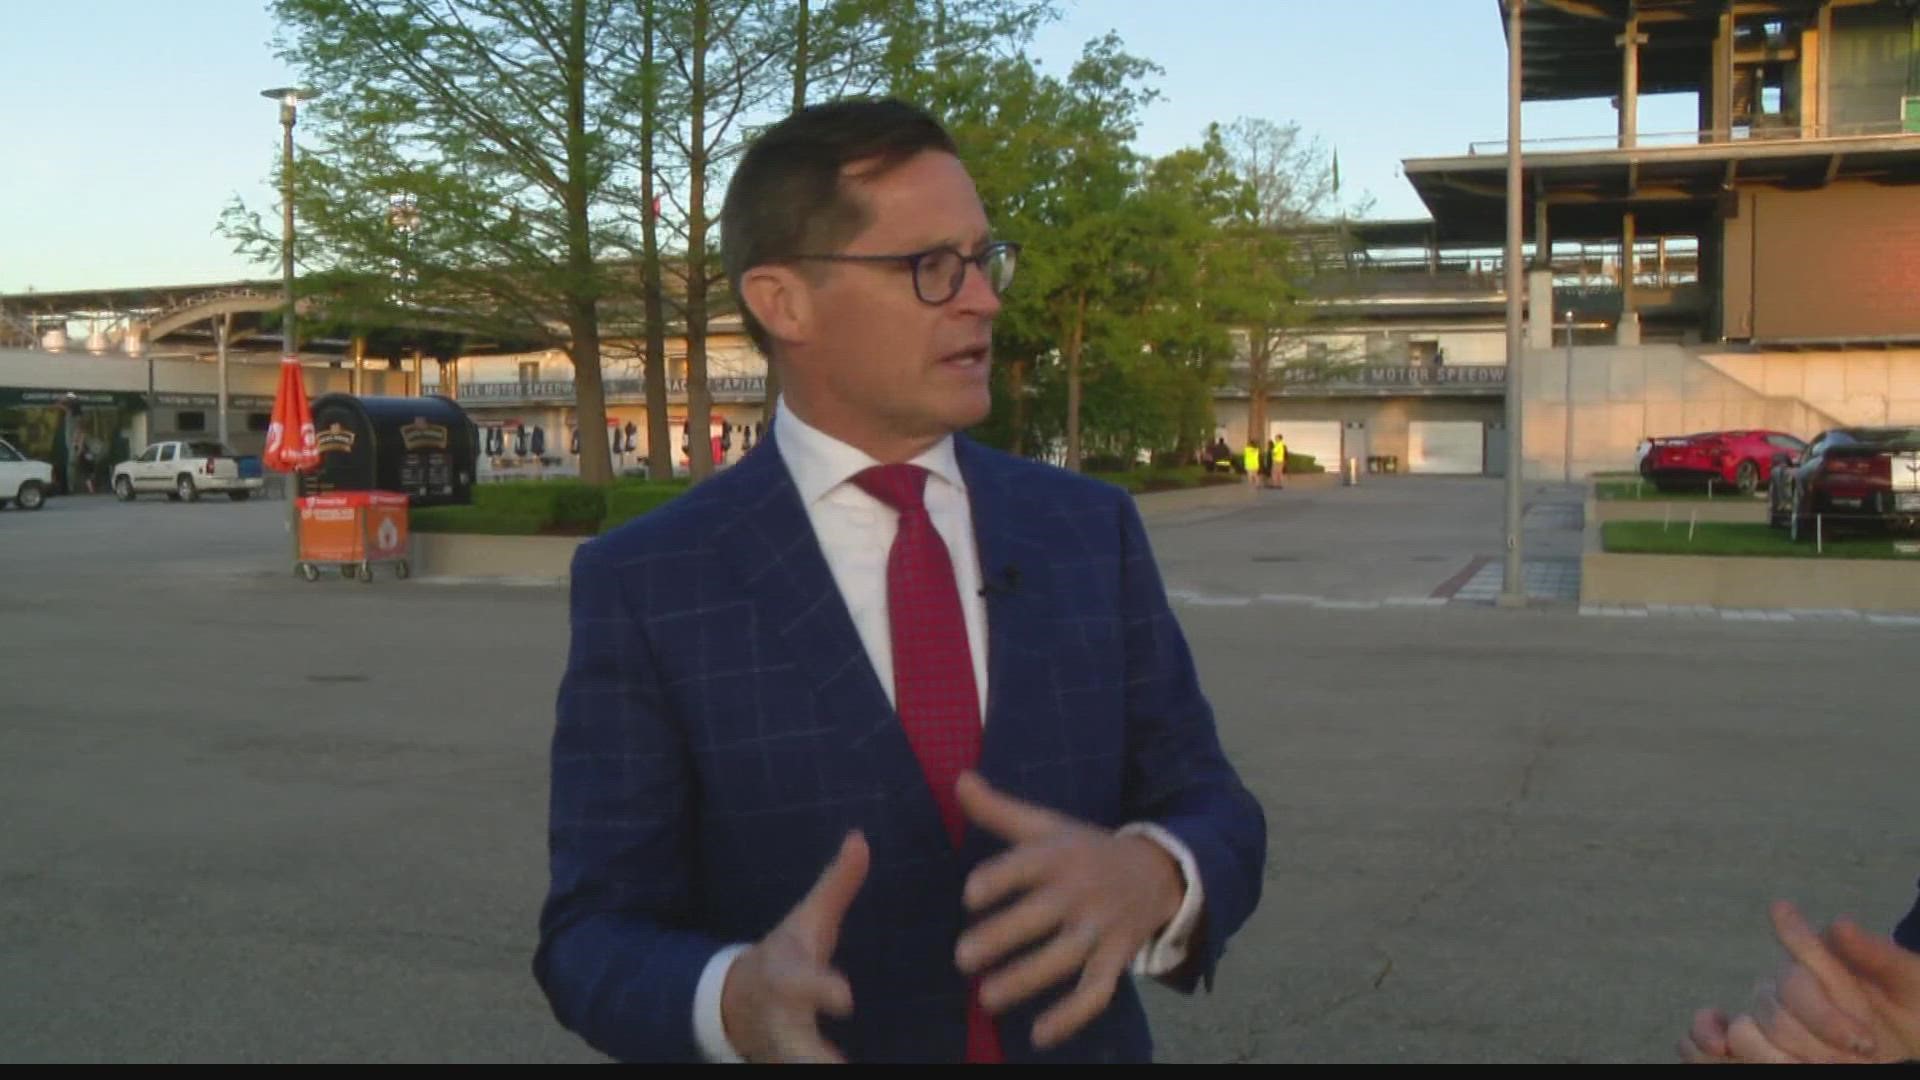 The Indianapolis Motor Speedway road course is set up for the GMR Grand Prix on Saturday on NBC and WTHR. Doug Boles from IMS told us what to expect.